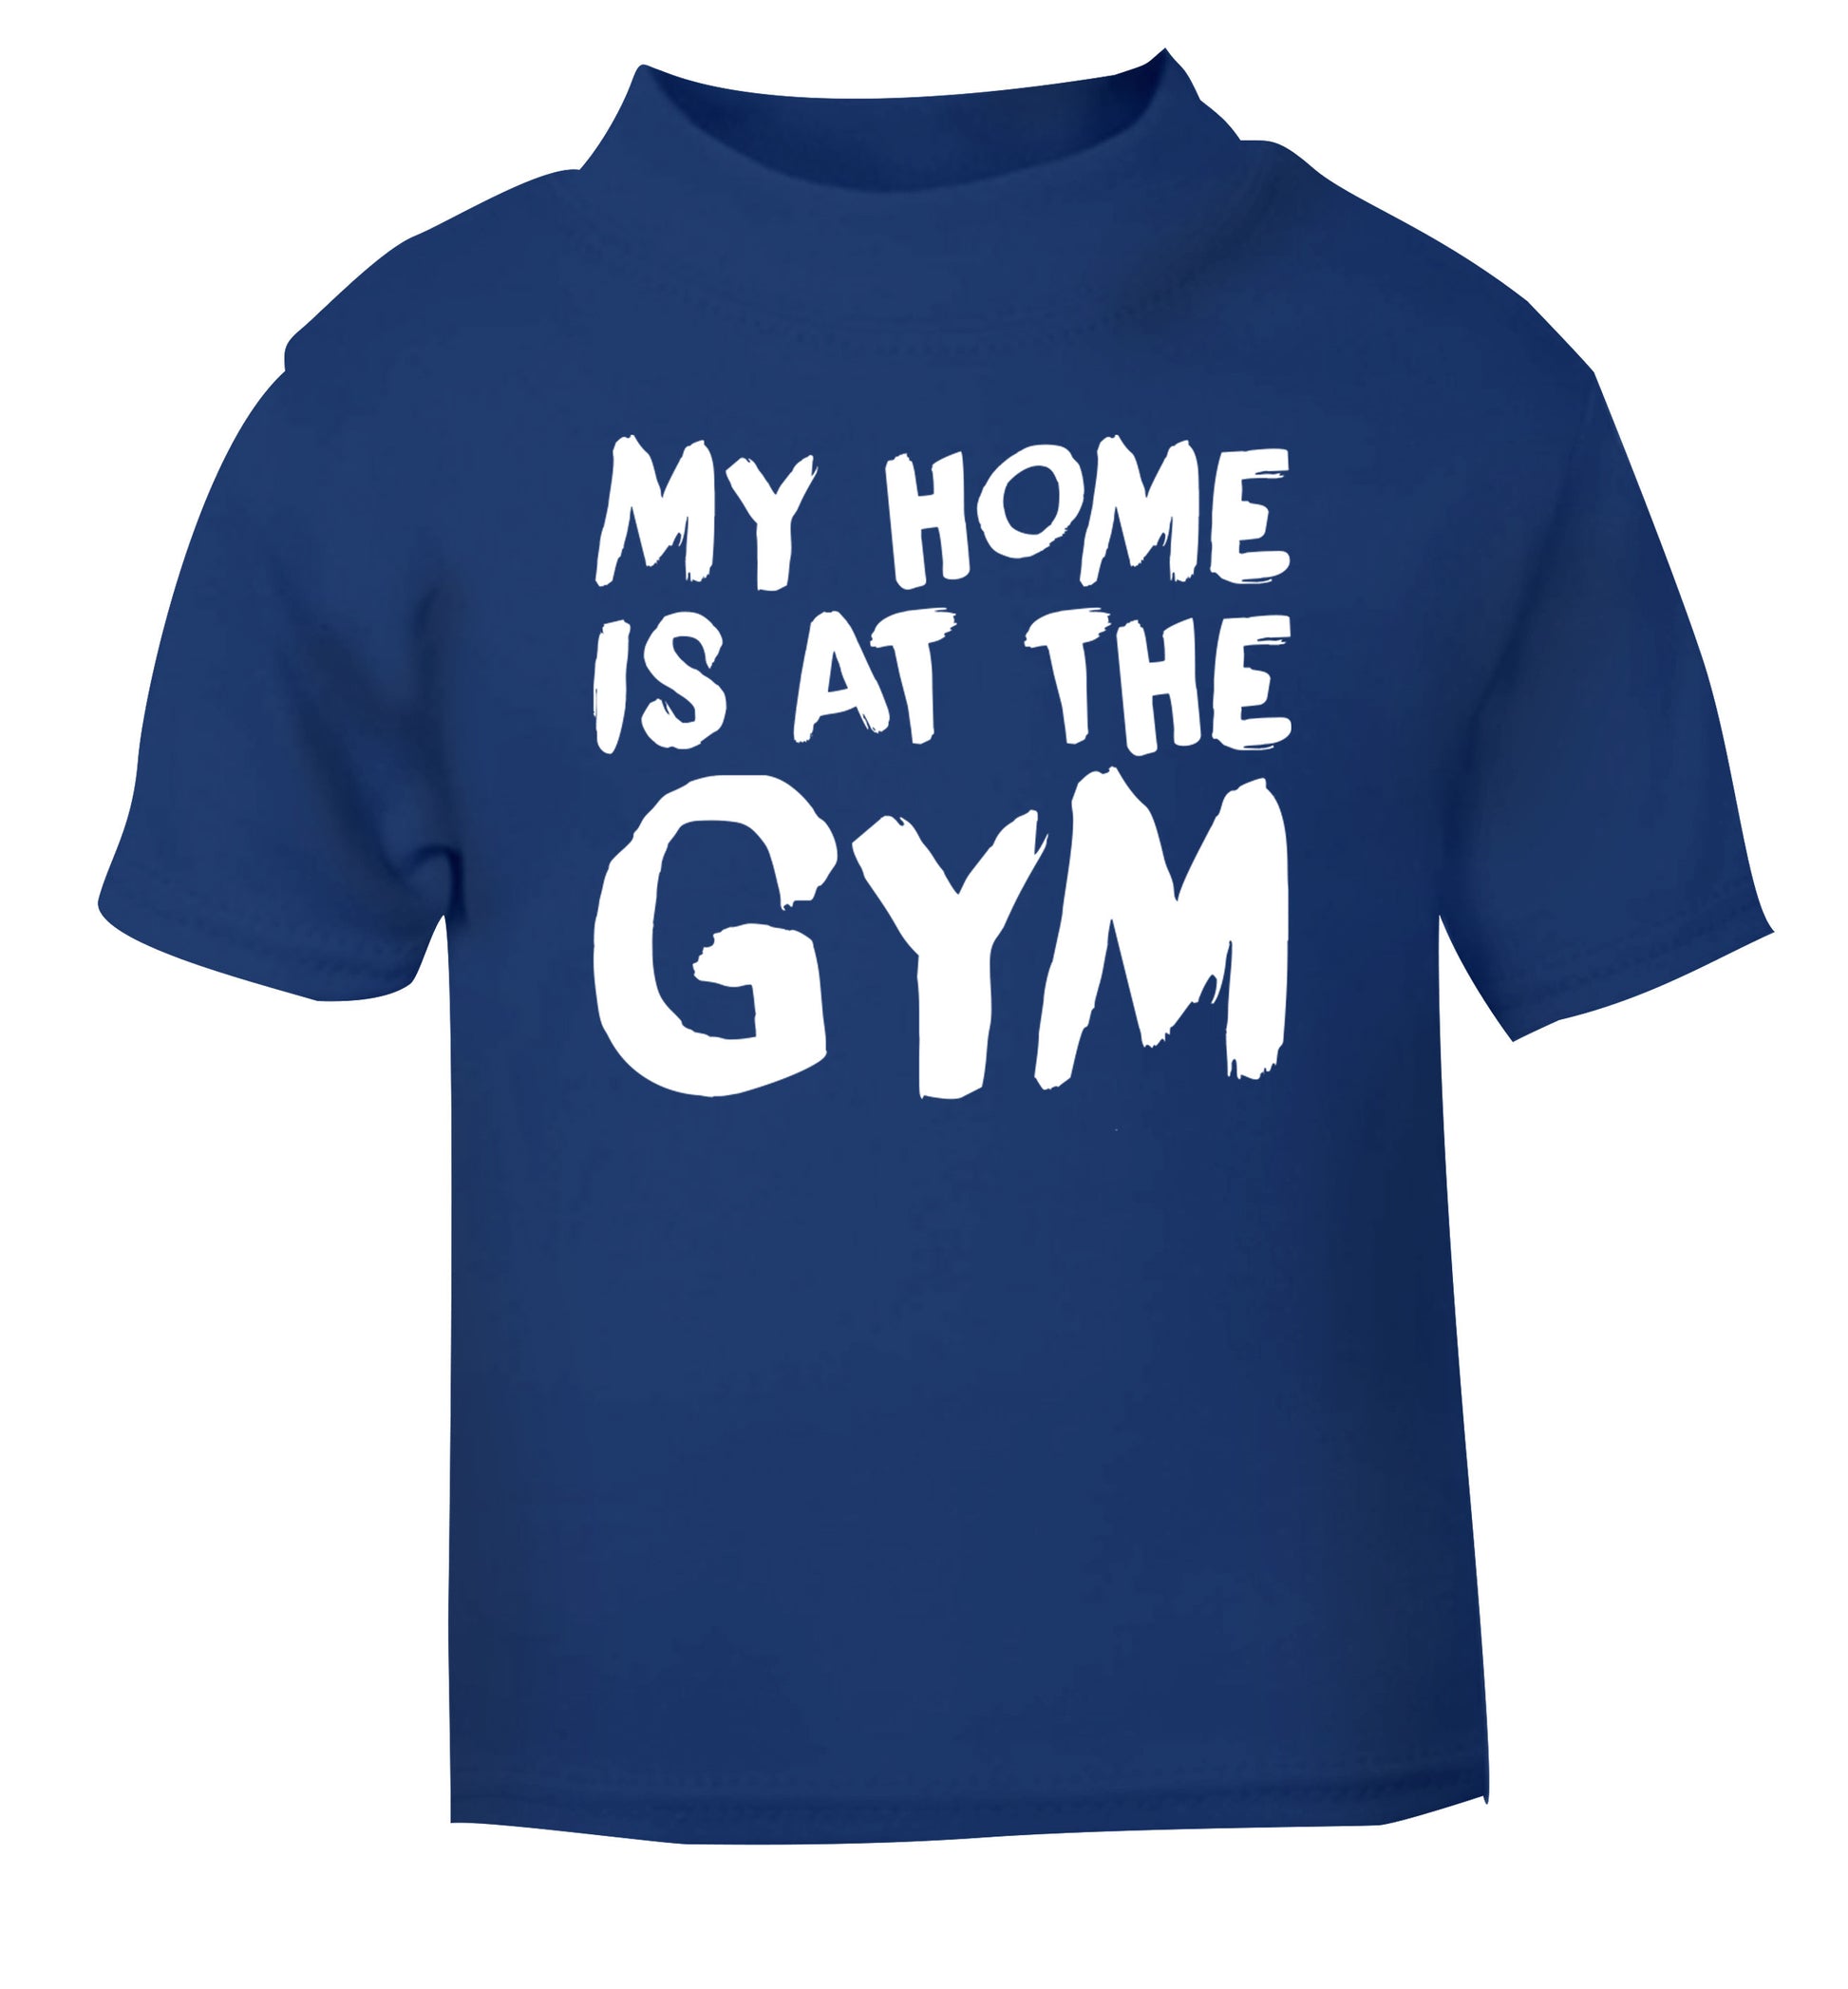 My home is at the gym blue Baby Toddler Tshirt 2 Years